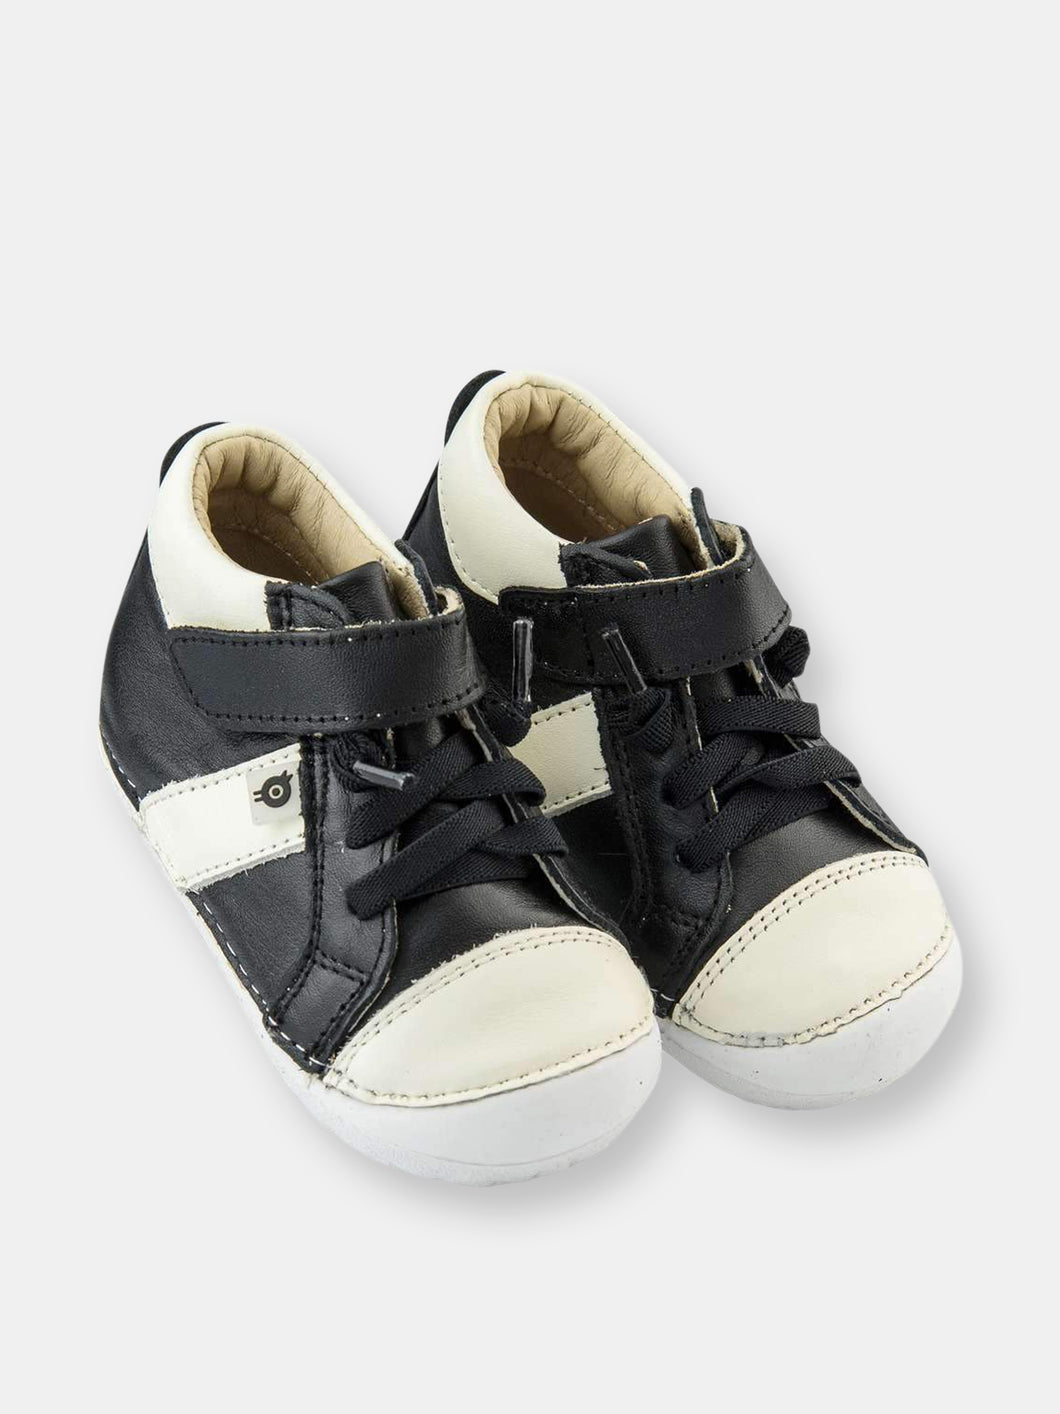 Black/White Earth Pave Shoes